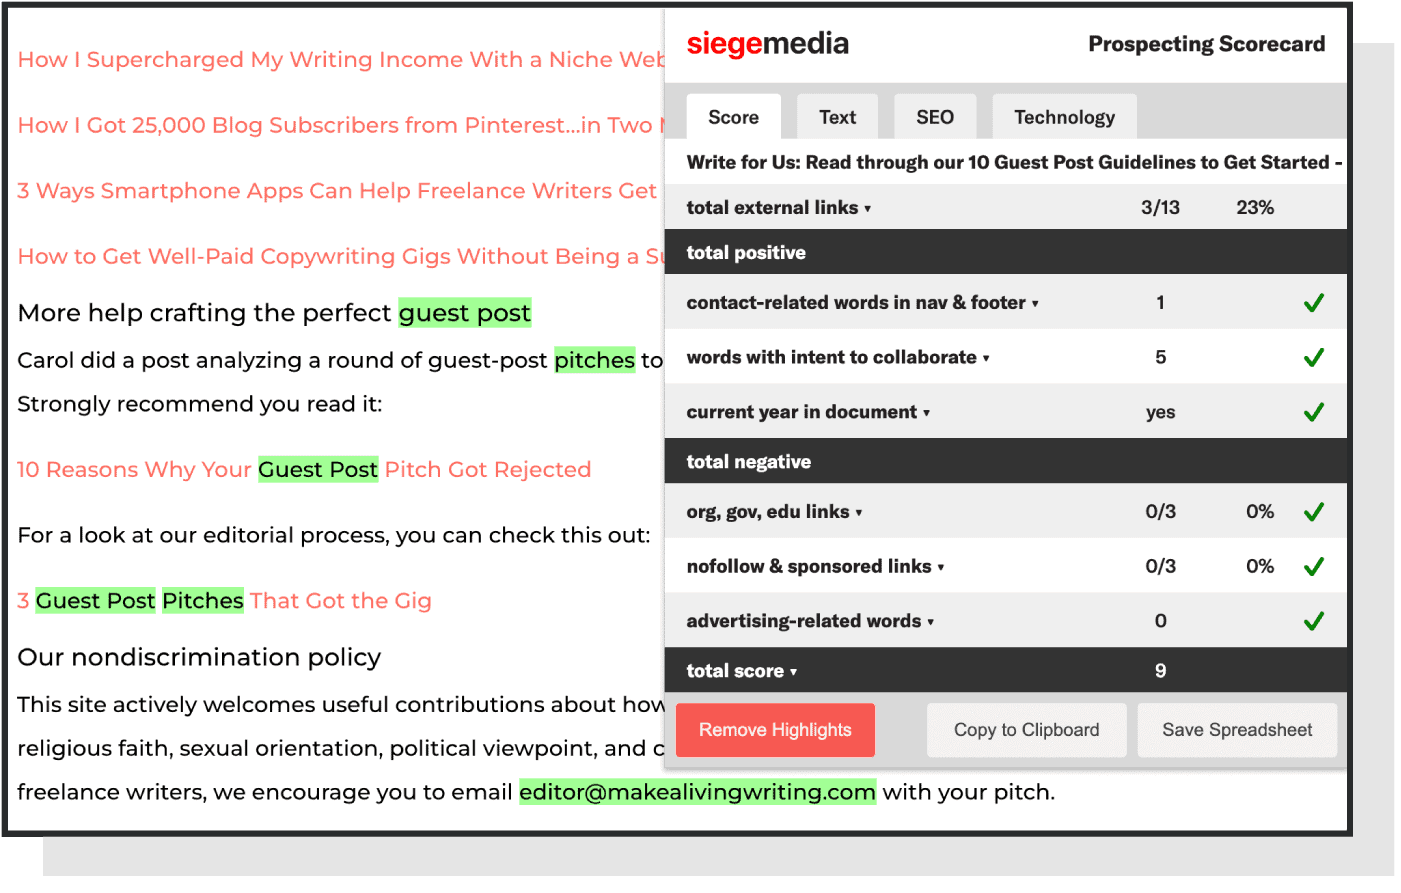 Prospecting scorecard highlighting positive keywords and email addresses in body copy on sites.